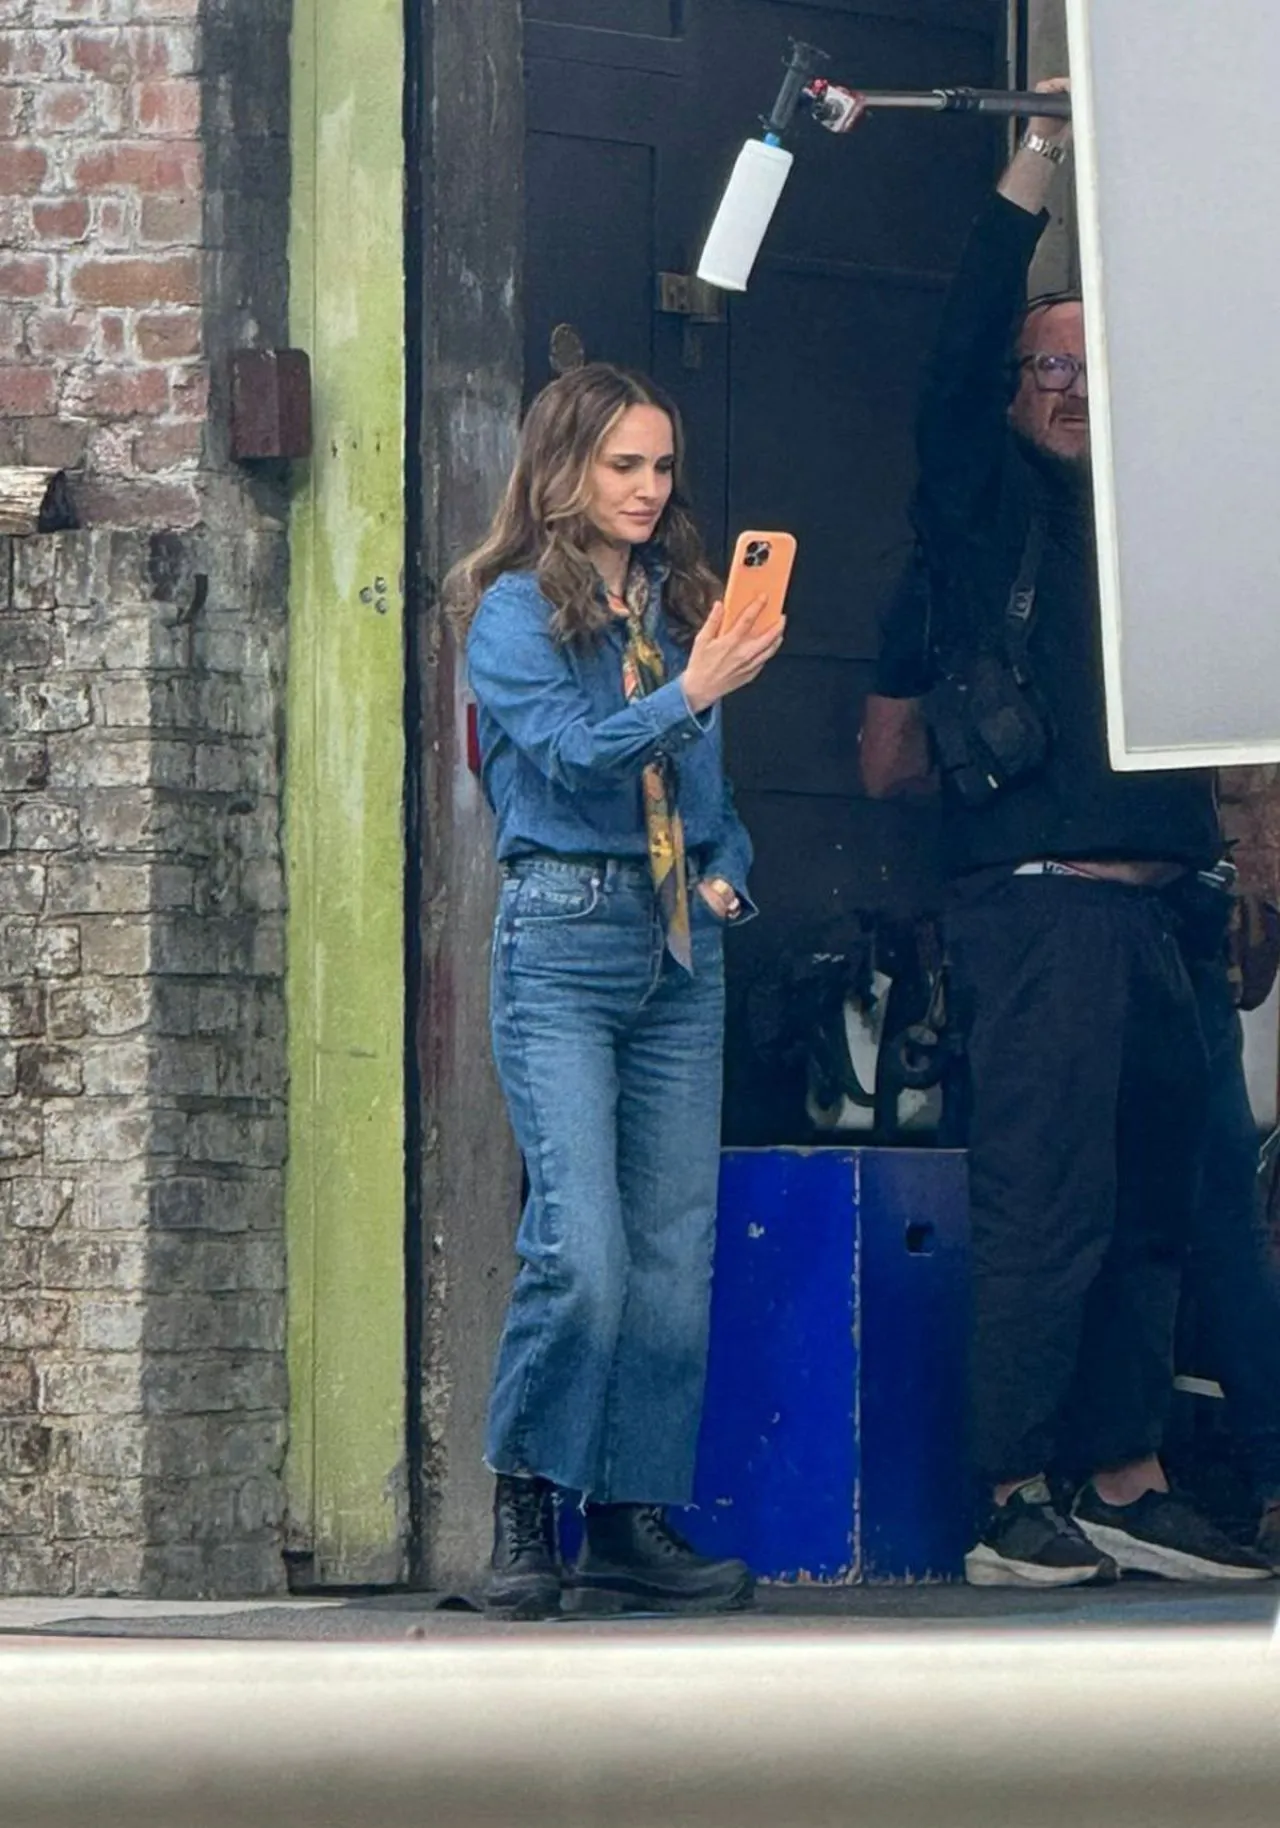 NATALIE PORTMAN ON THE SET OF FOUNTAIN OF YOUTH IN LONDON2